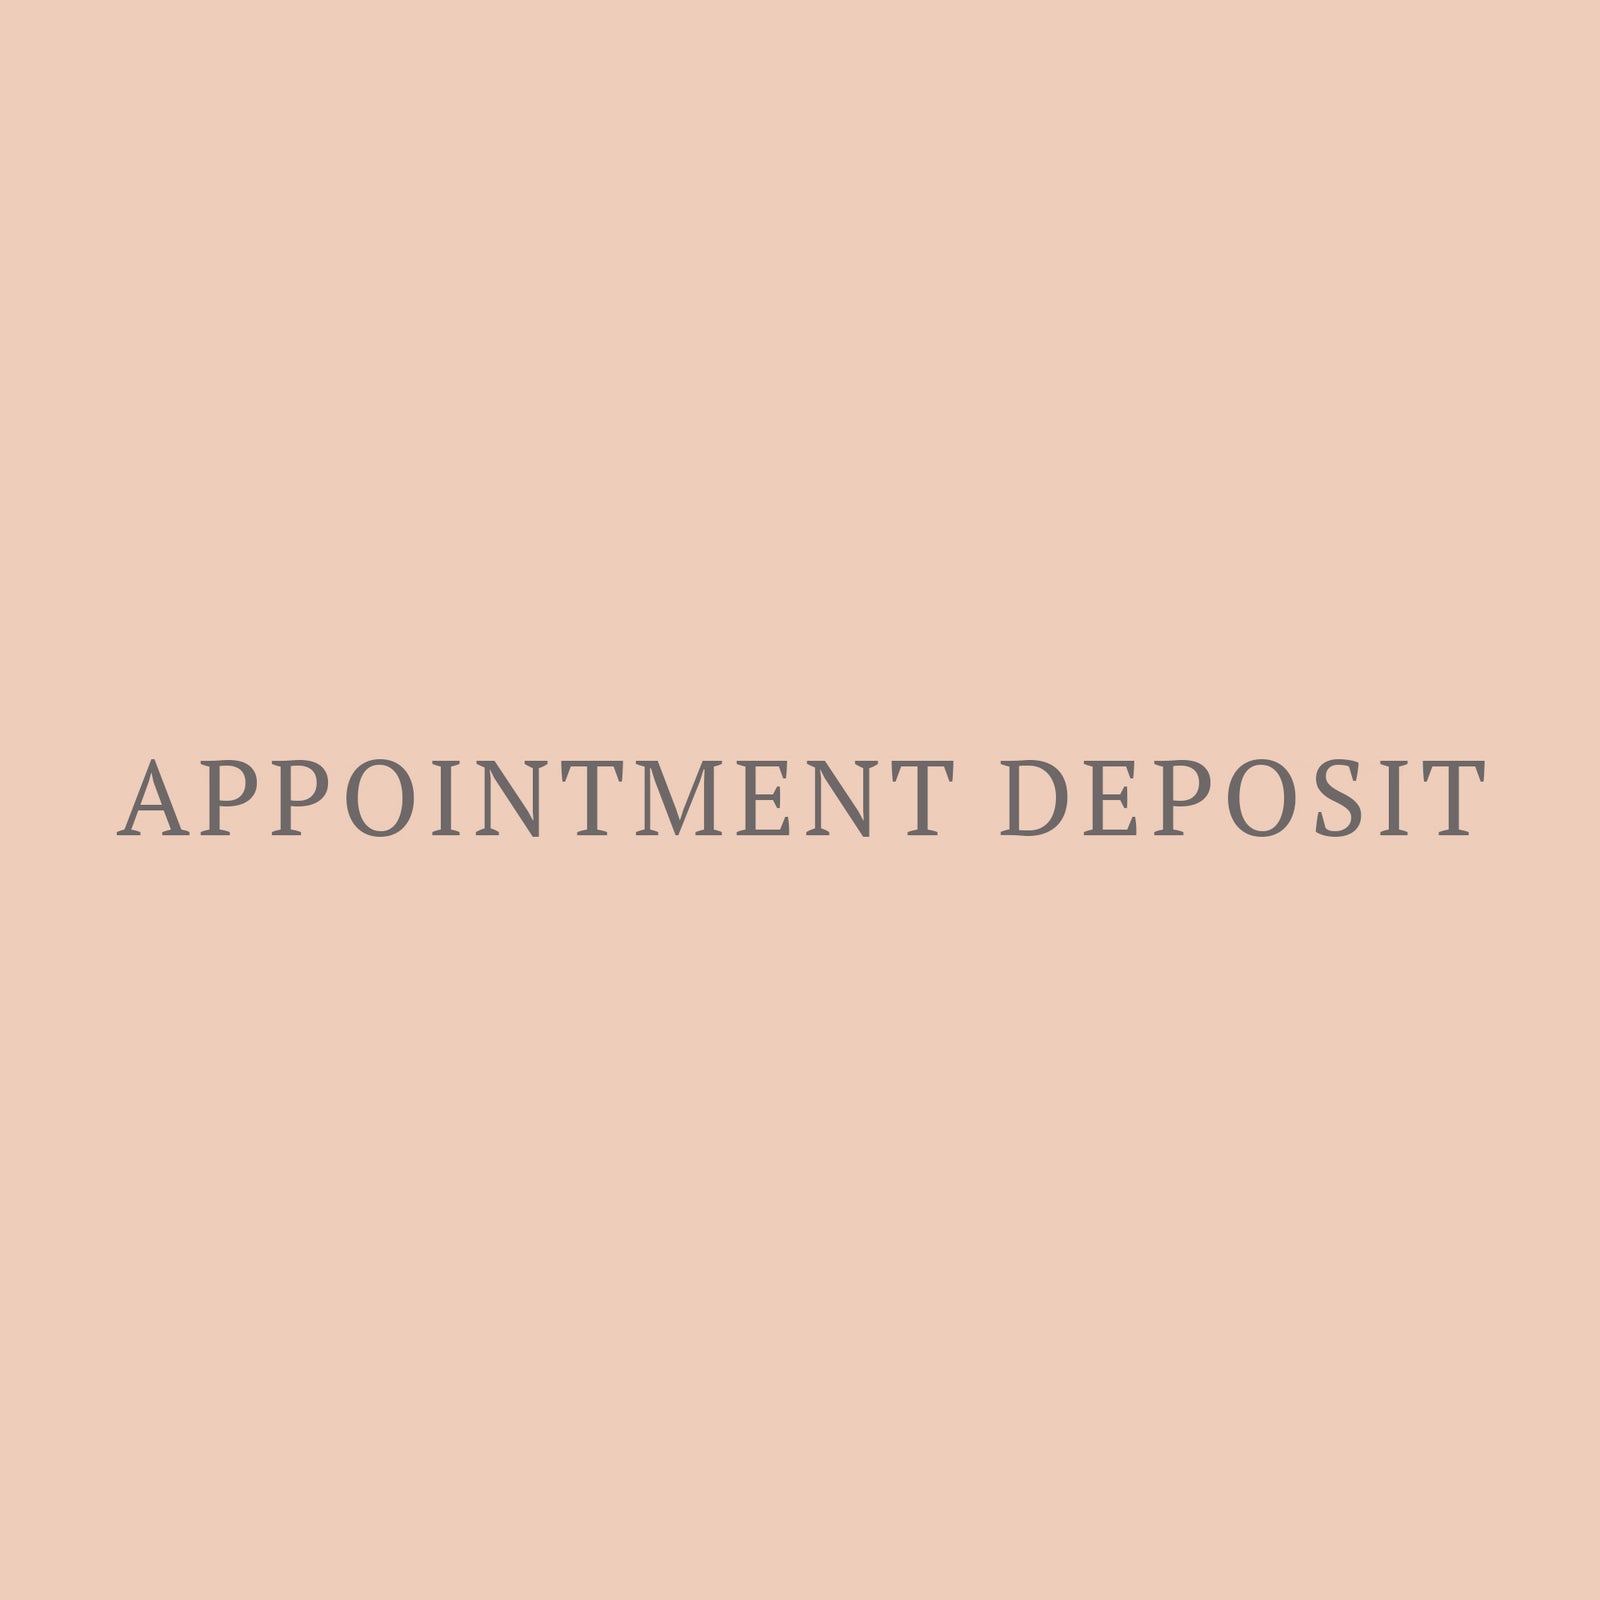 Appointment Deposit